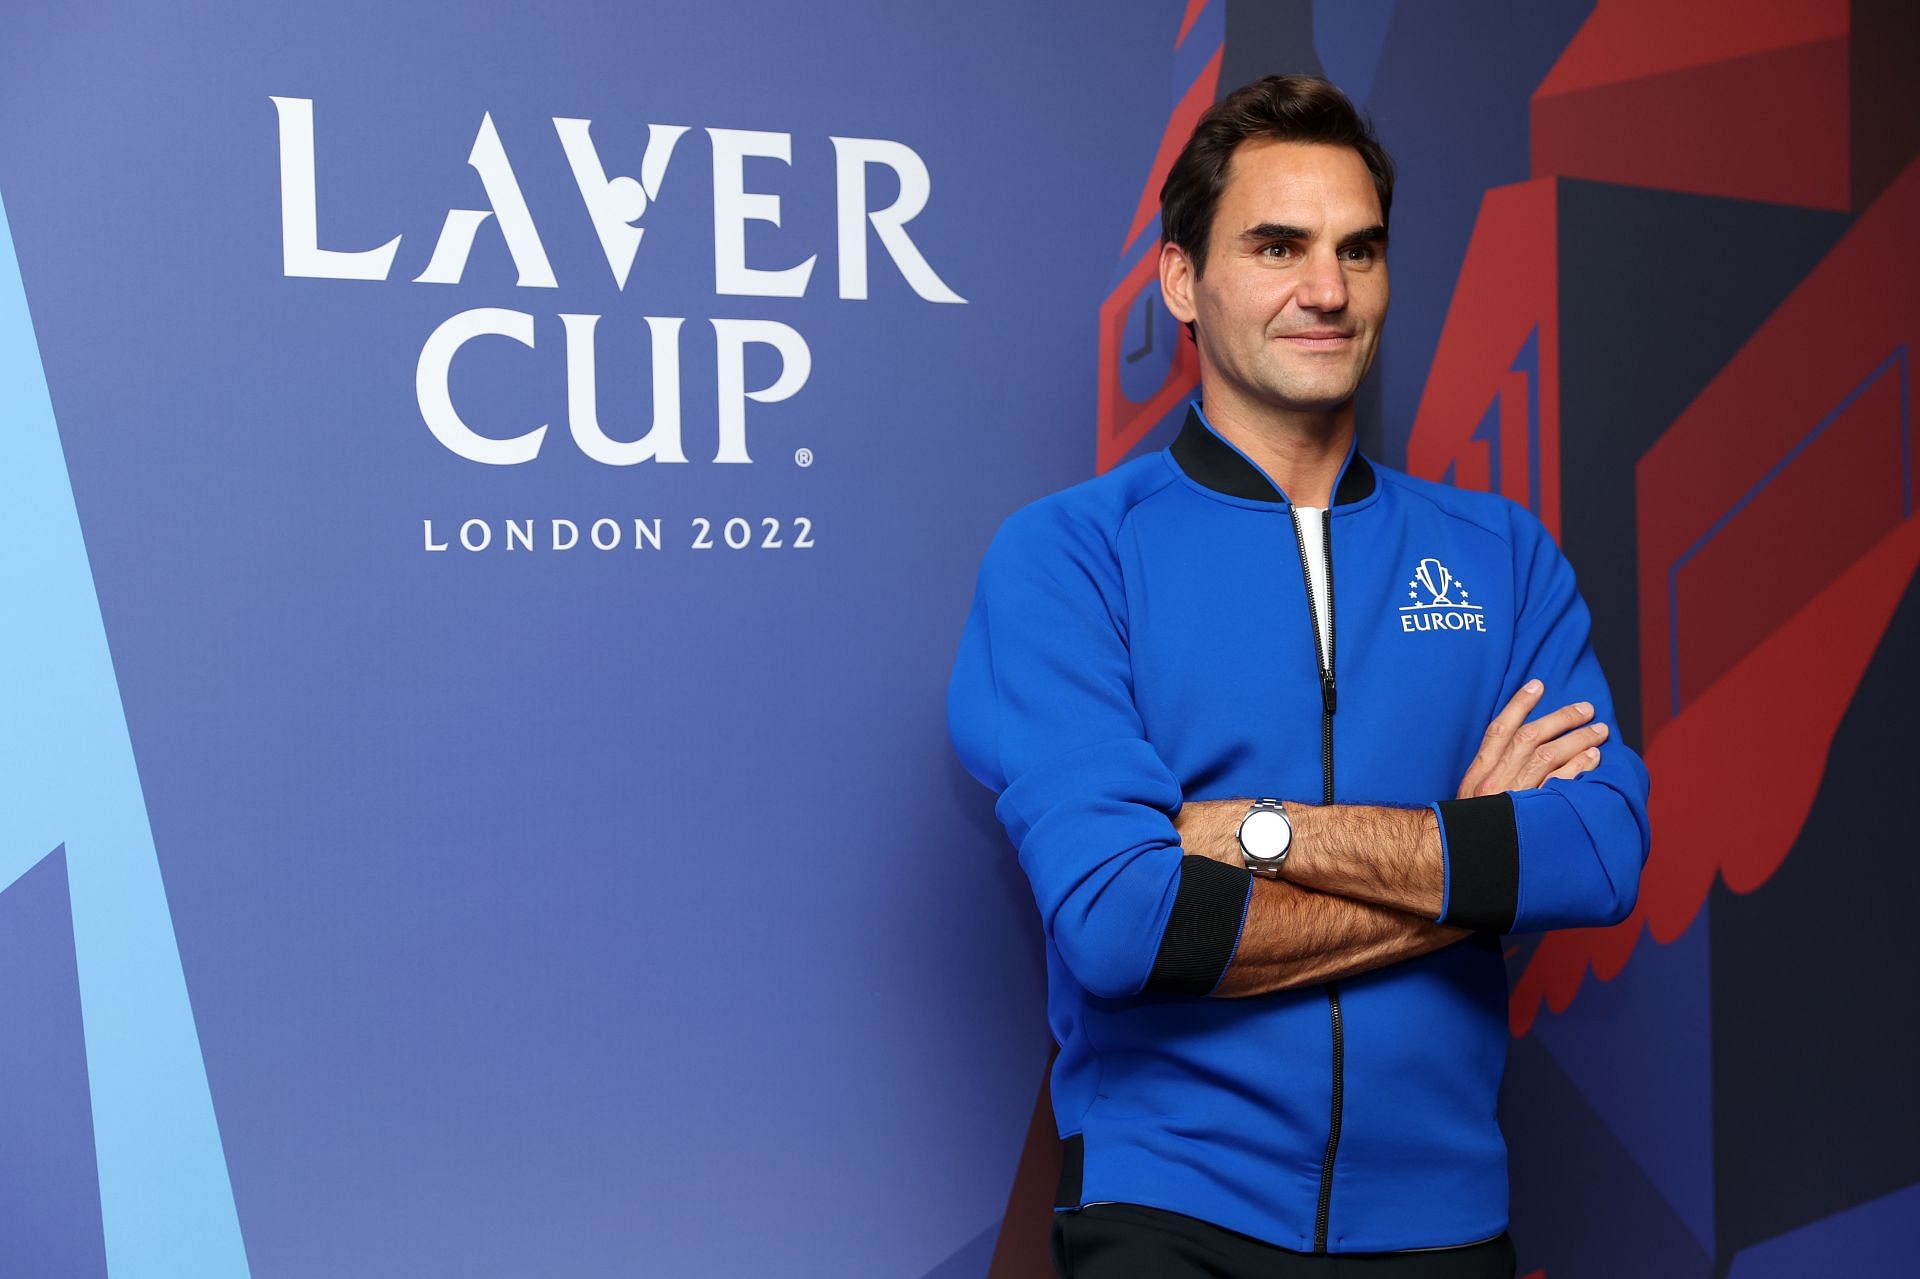 Roger Federer retired from tennis at the Laver Cup 2022.